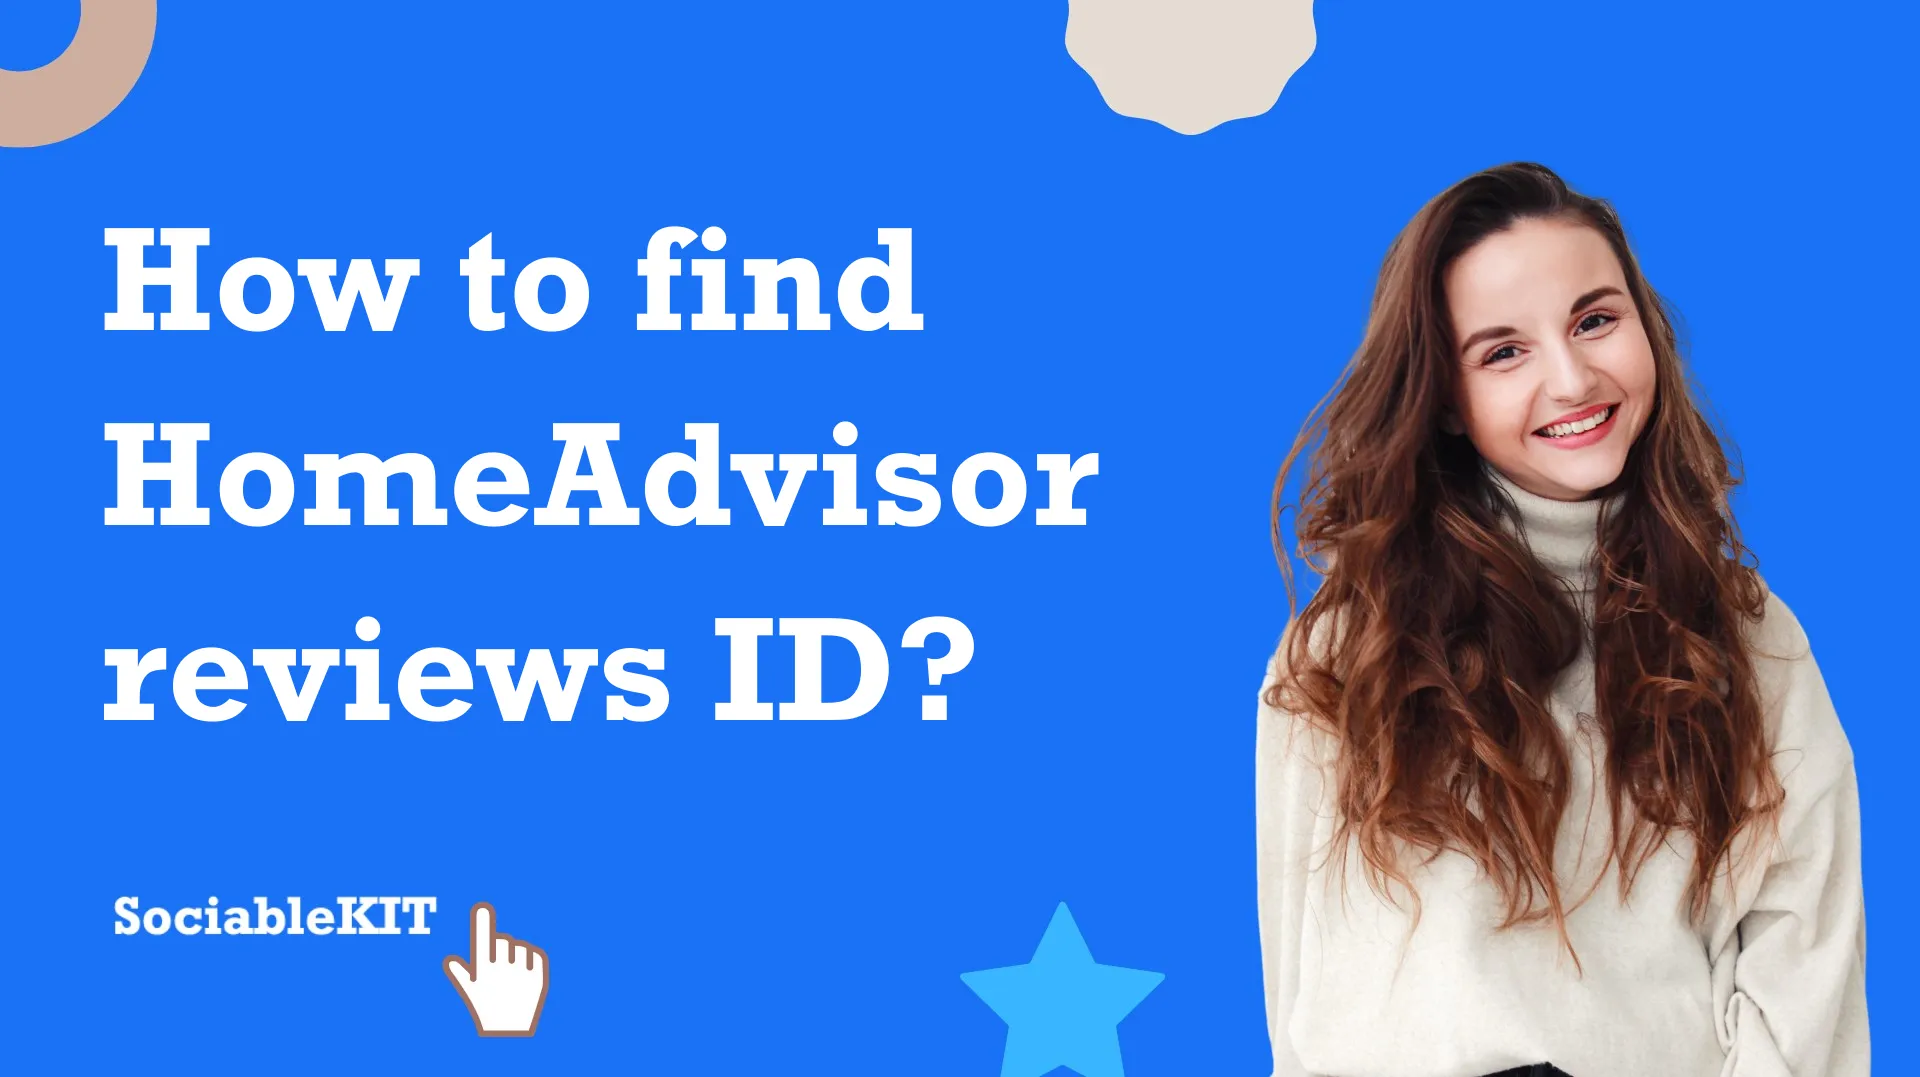 How to find HomeAdvisor reviews ID? Step-by-step guide!